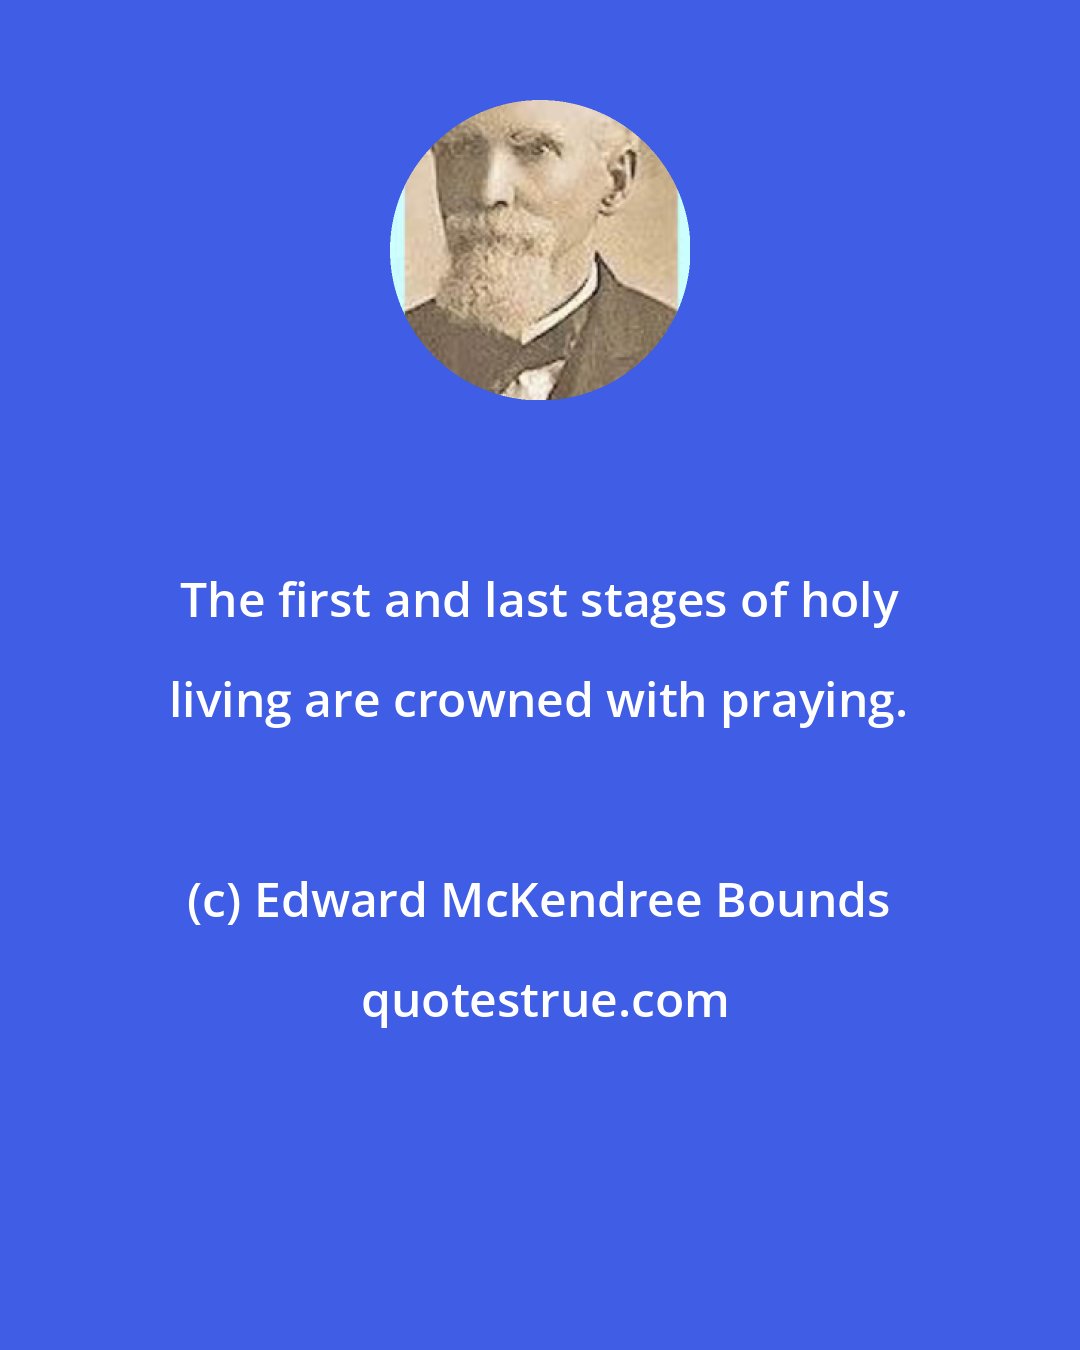 Edward McKendree Bounds: The first and last stages of holy living are crowned with praying.